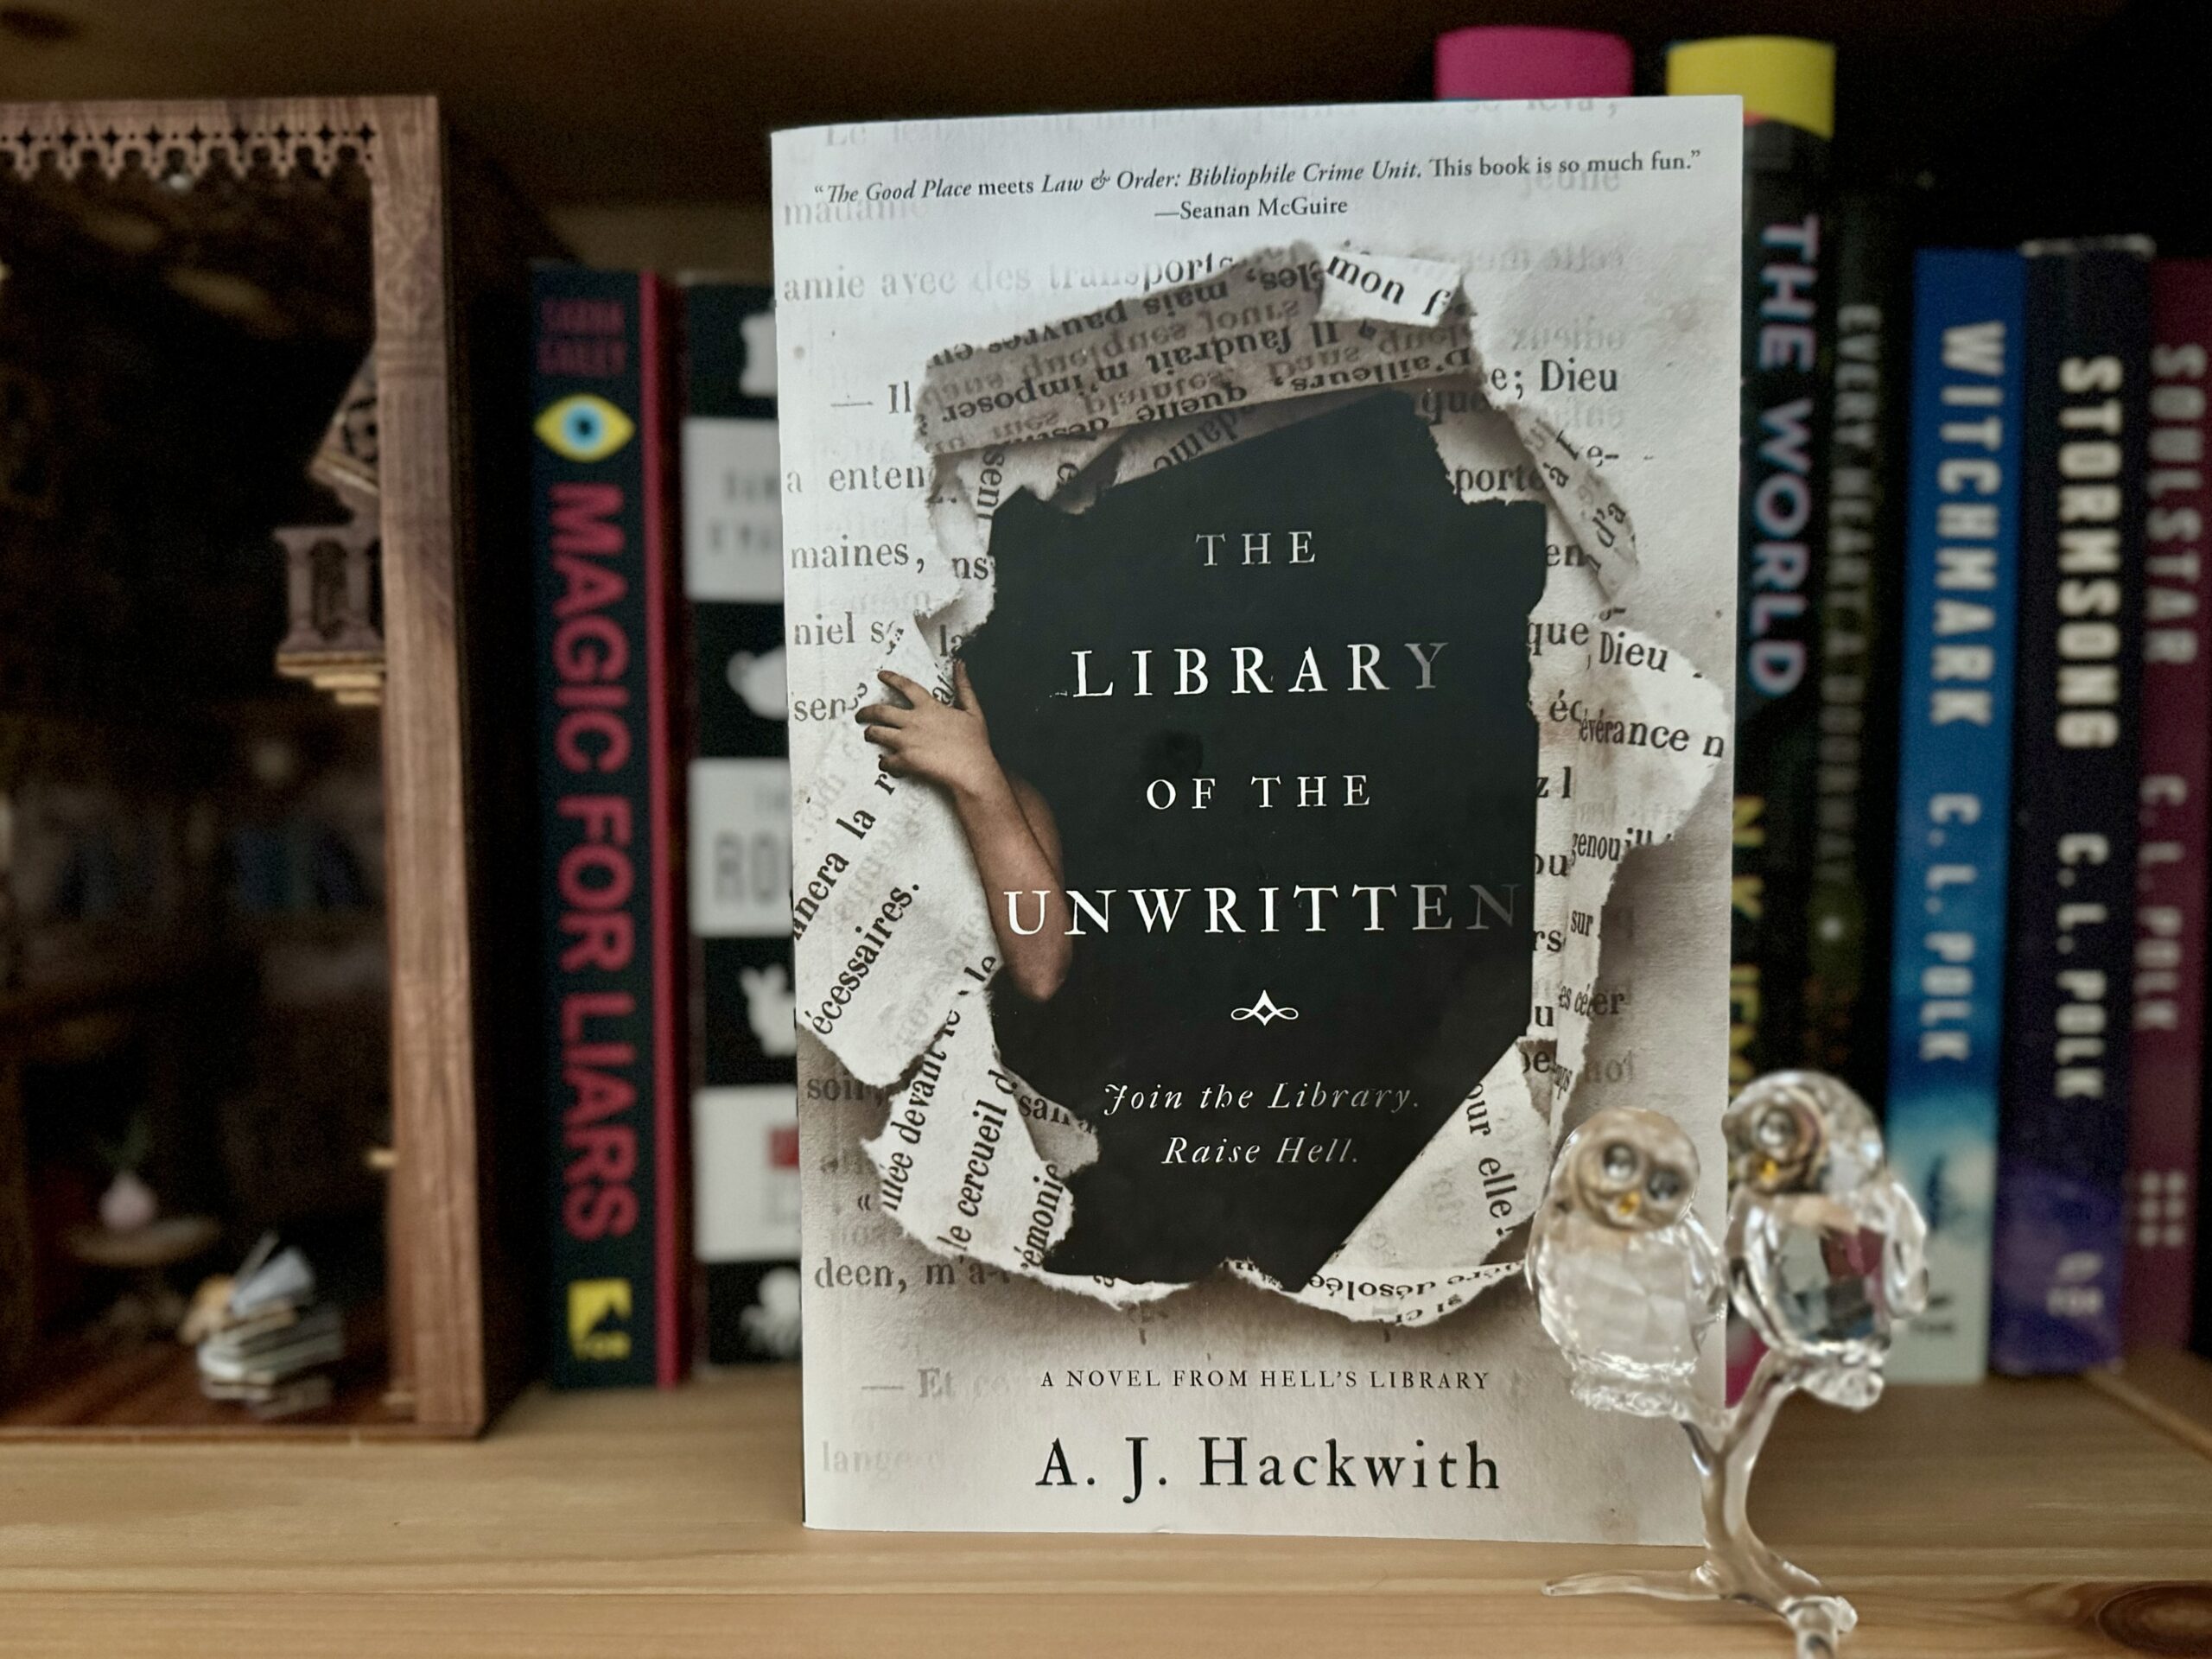 The “bookish” bar: Mislabeling The Library of the Unwritten